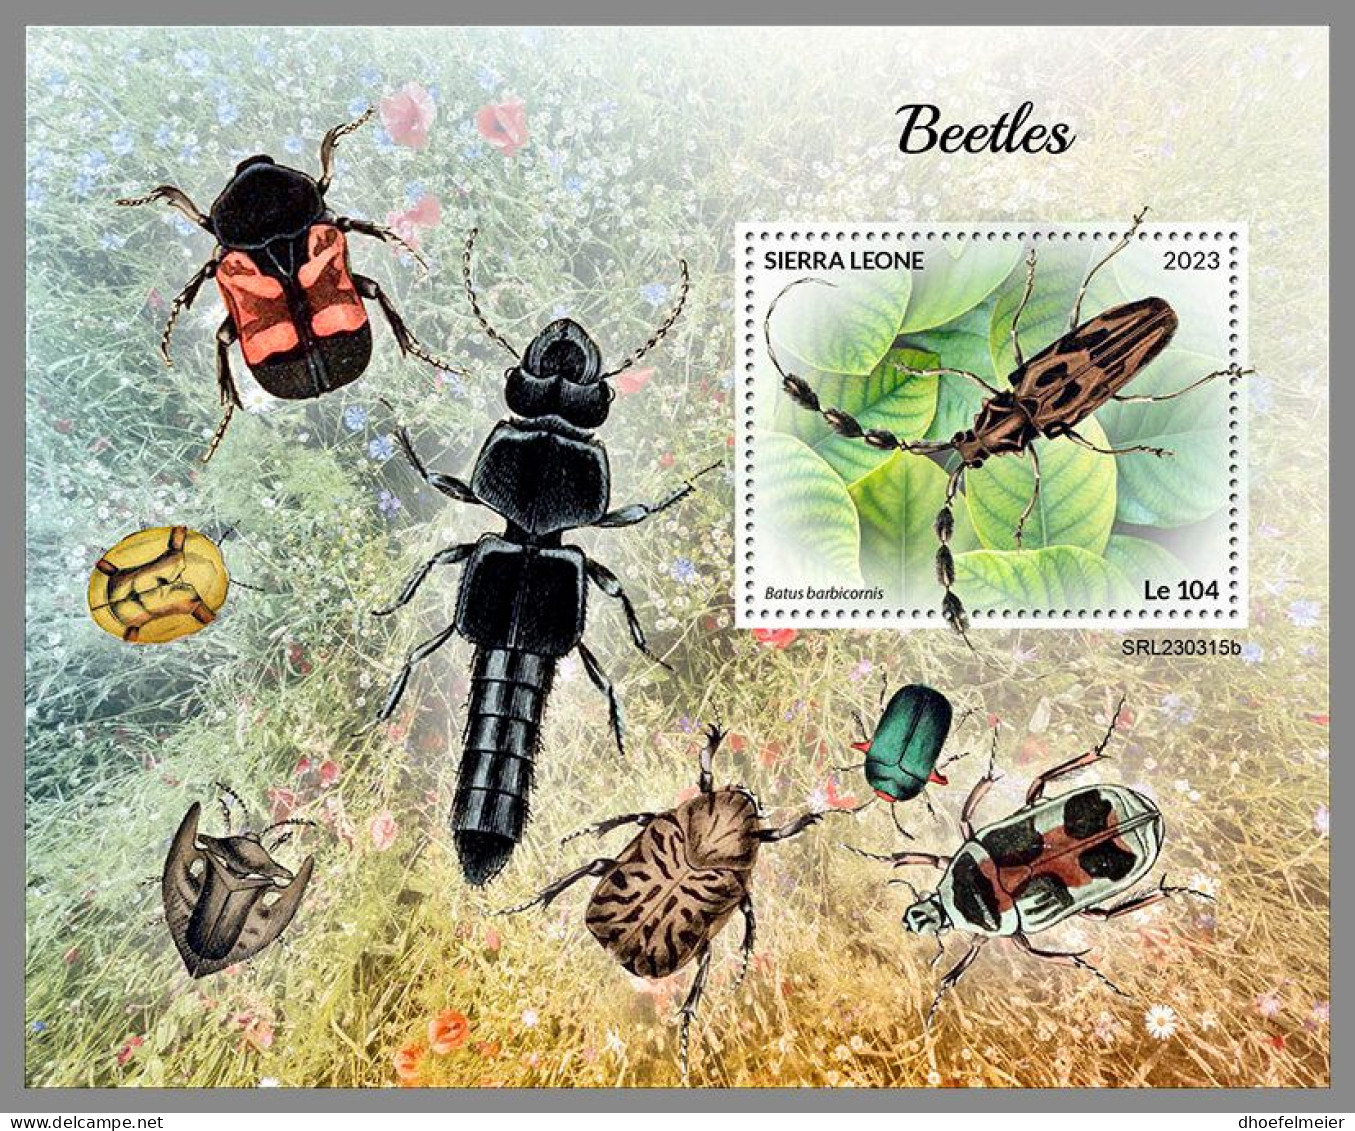 SIERRA LEONE 2023 MNH Beetles Käfer S/S – OFFICIAL ISSUE – DHQ2418 - Coléoptères